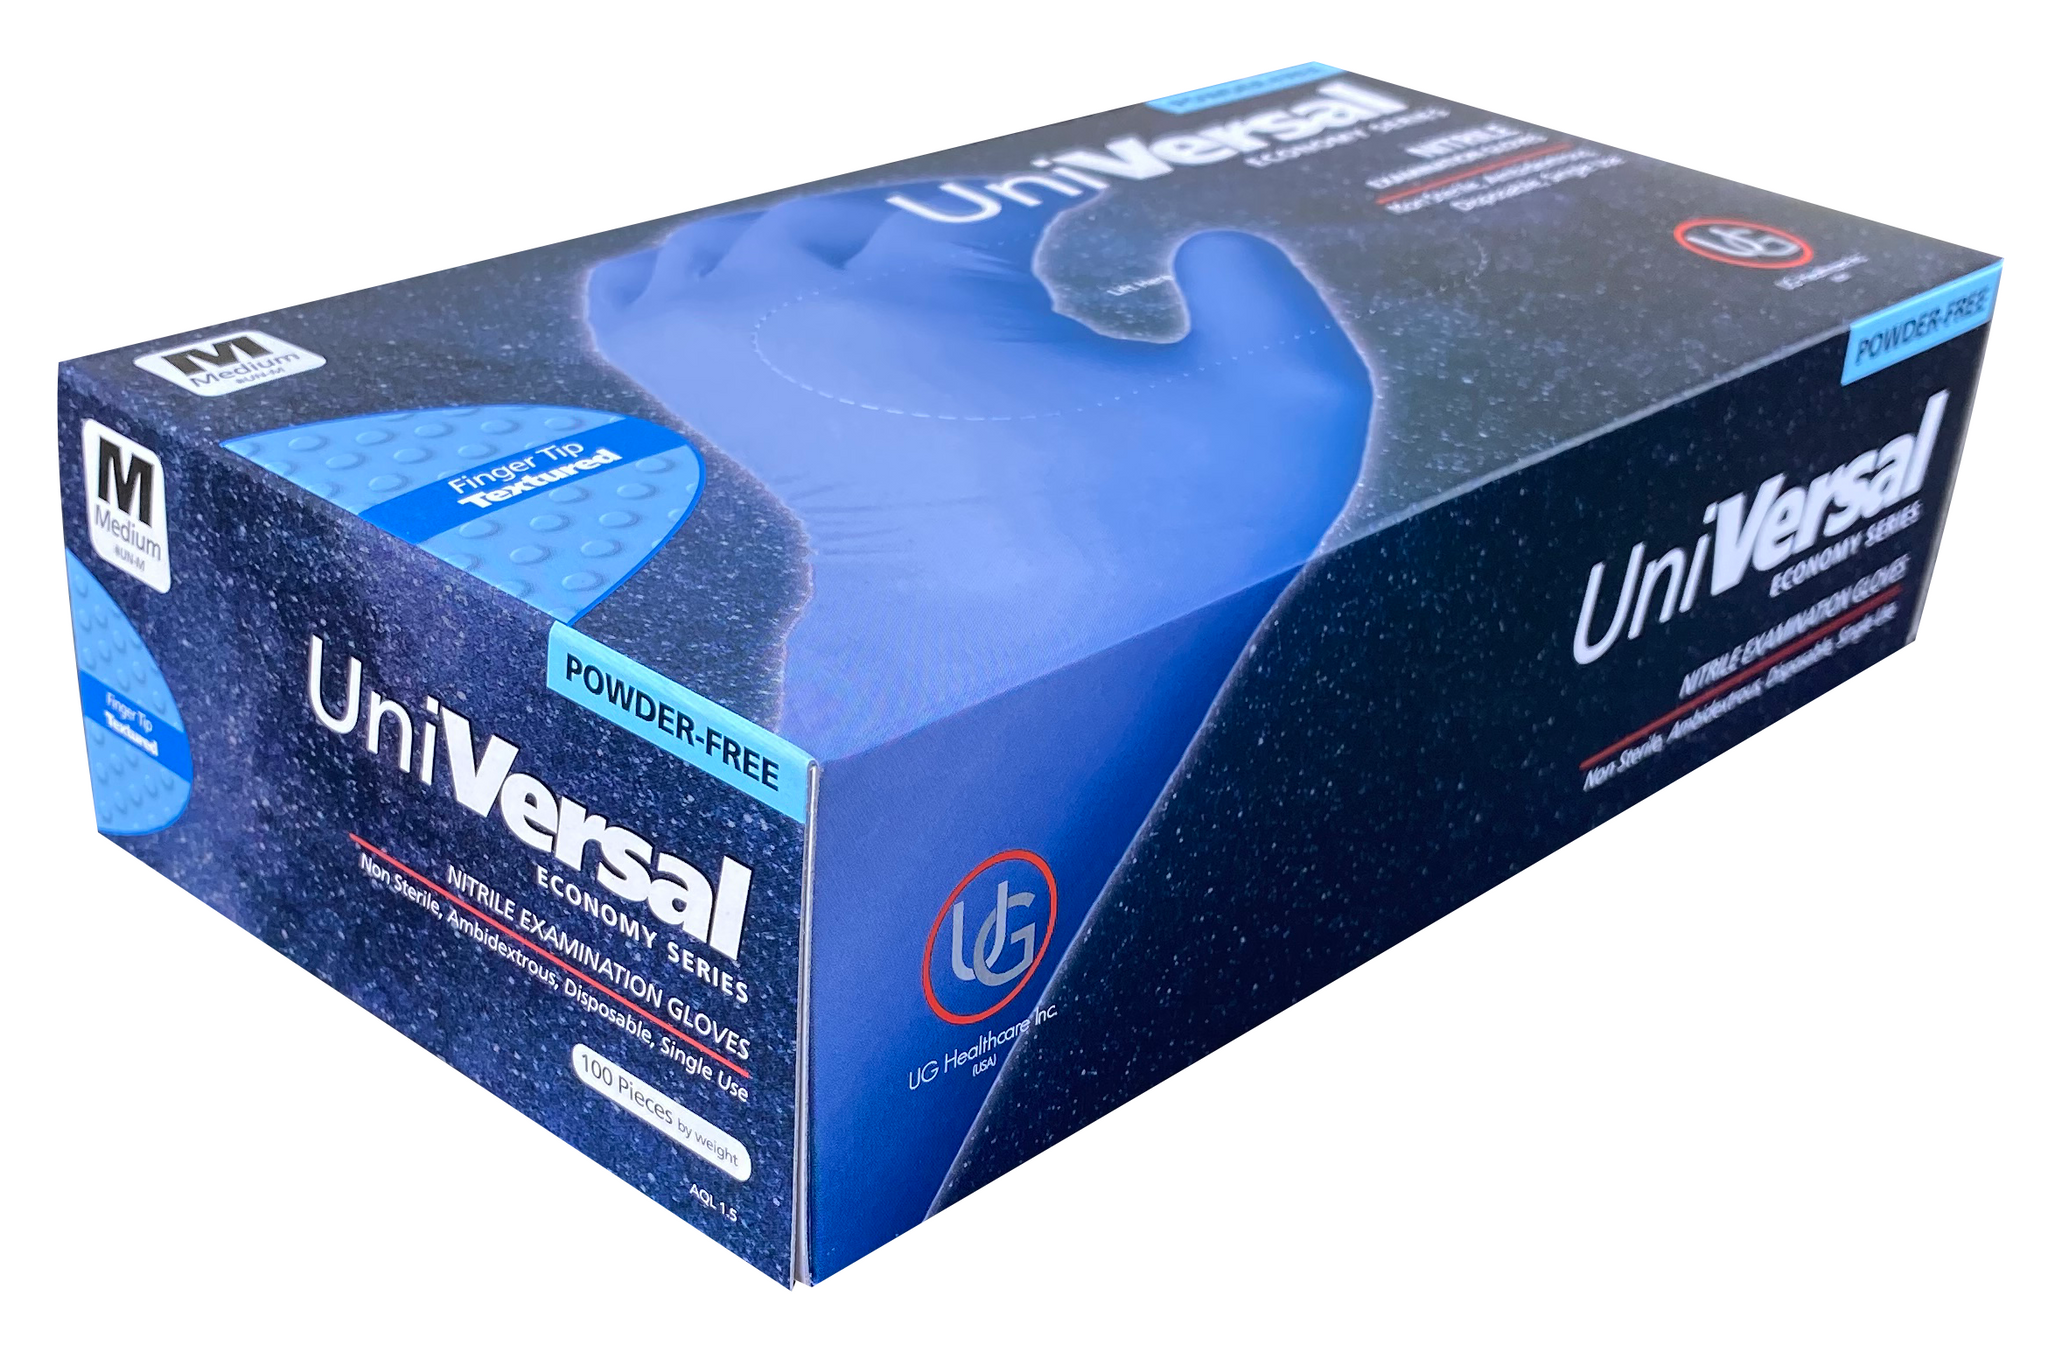 Universal Nitrile Ex Disposable Gloves -Box of 100 Gloves